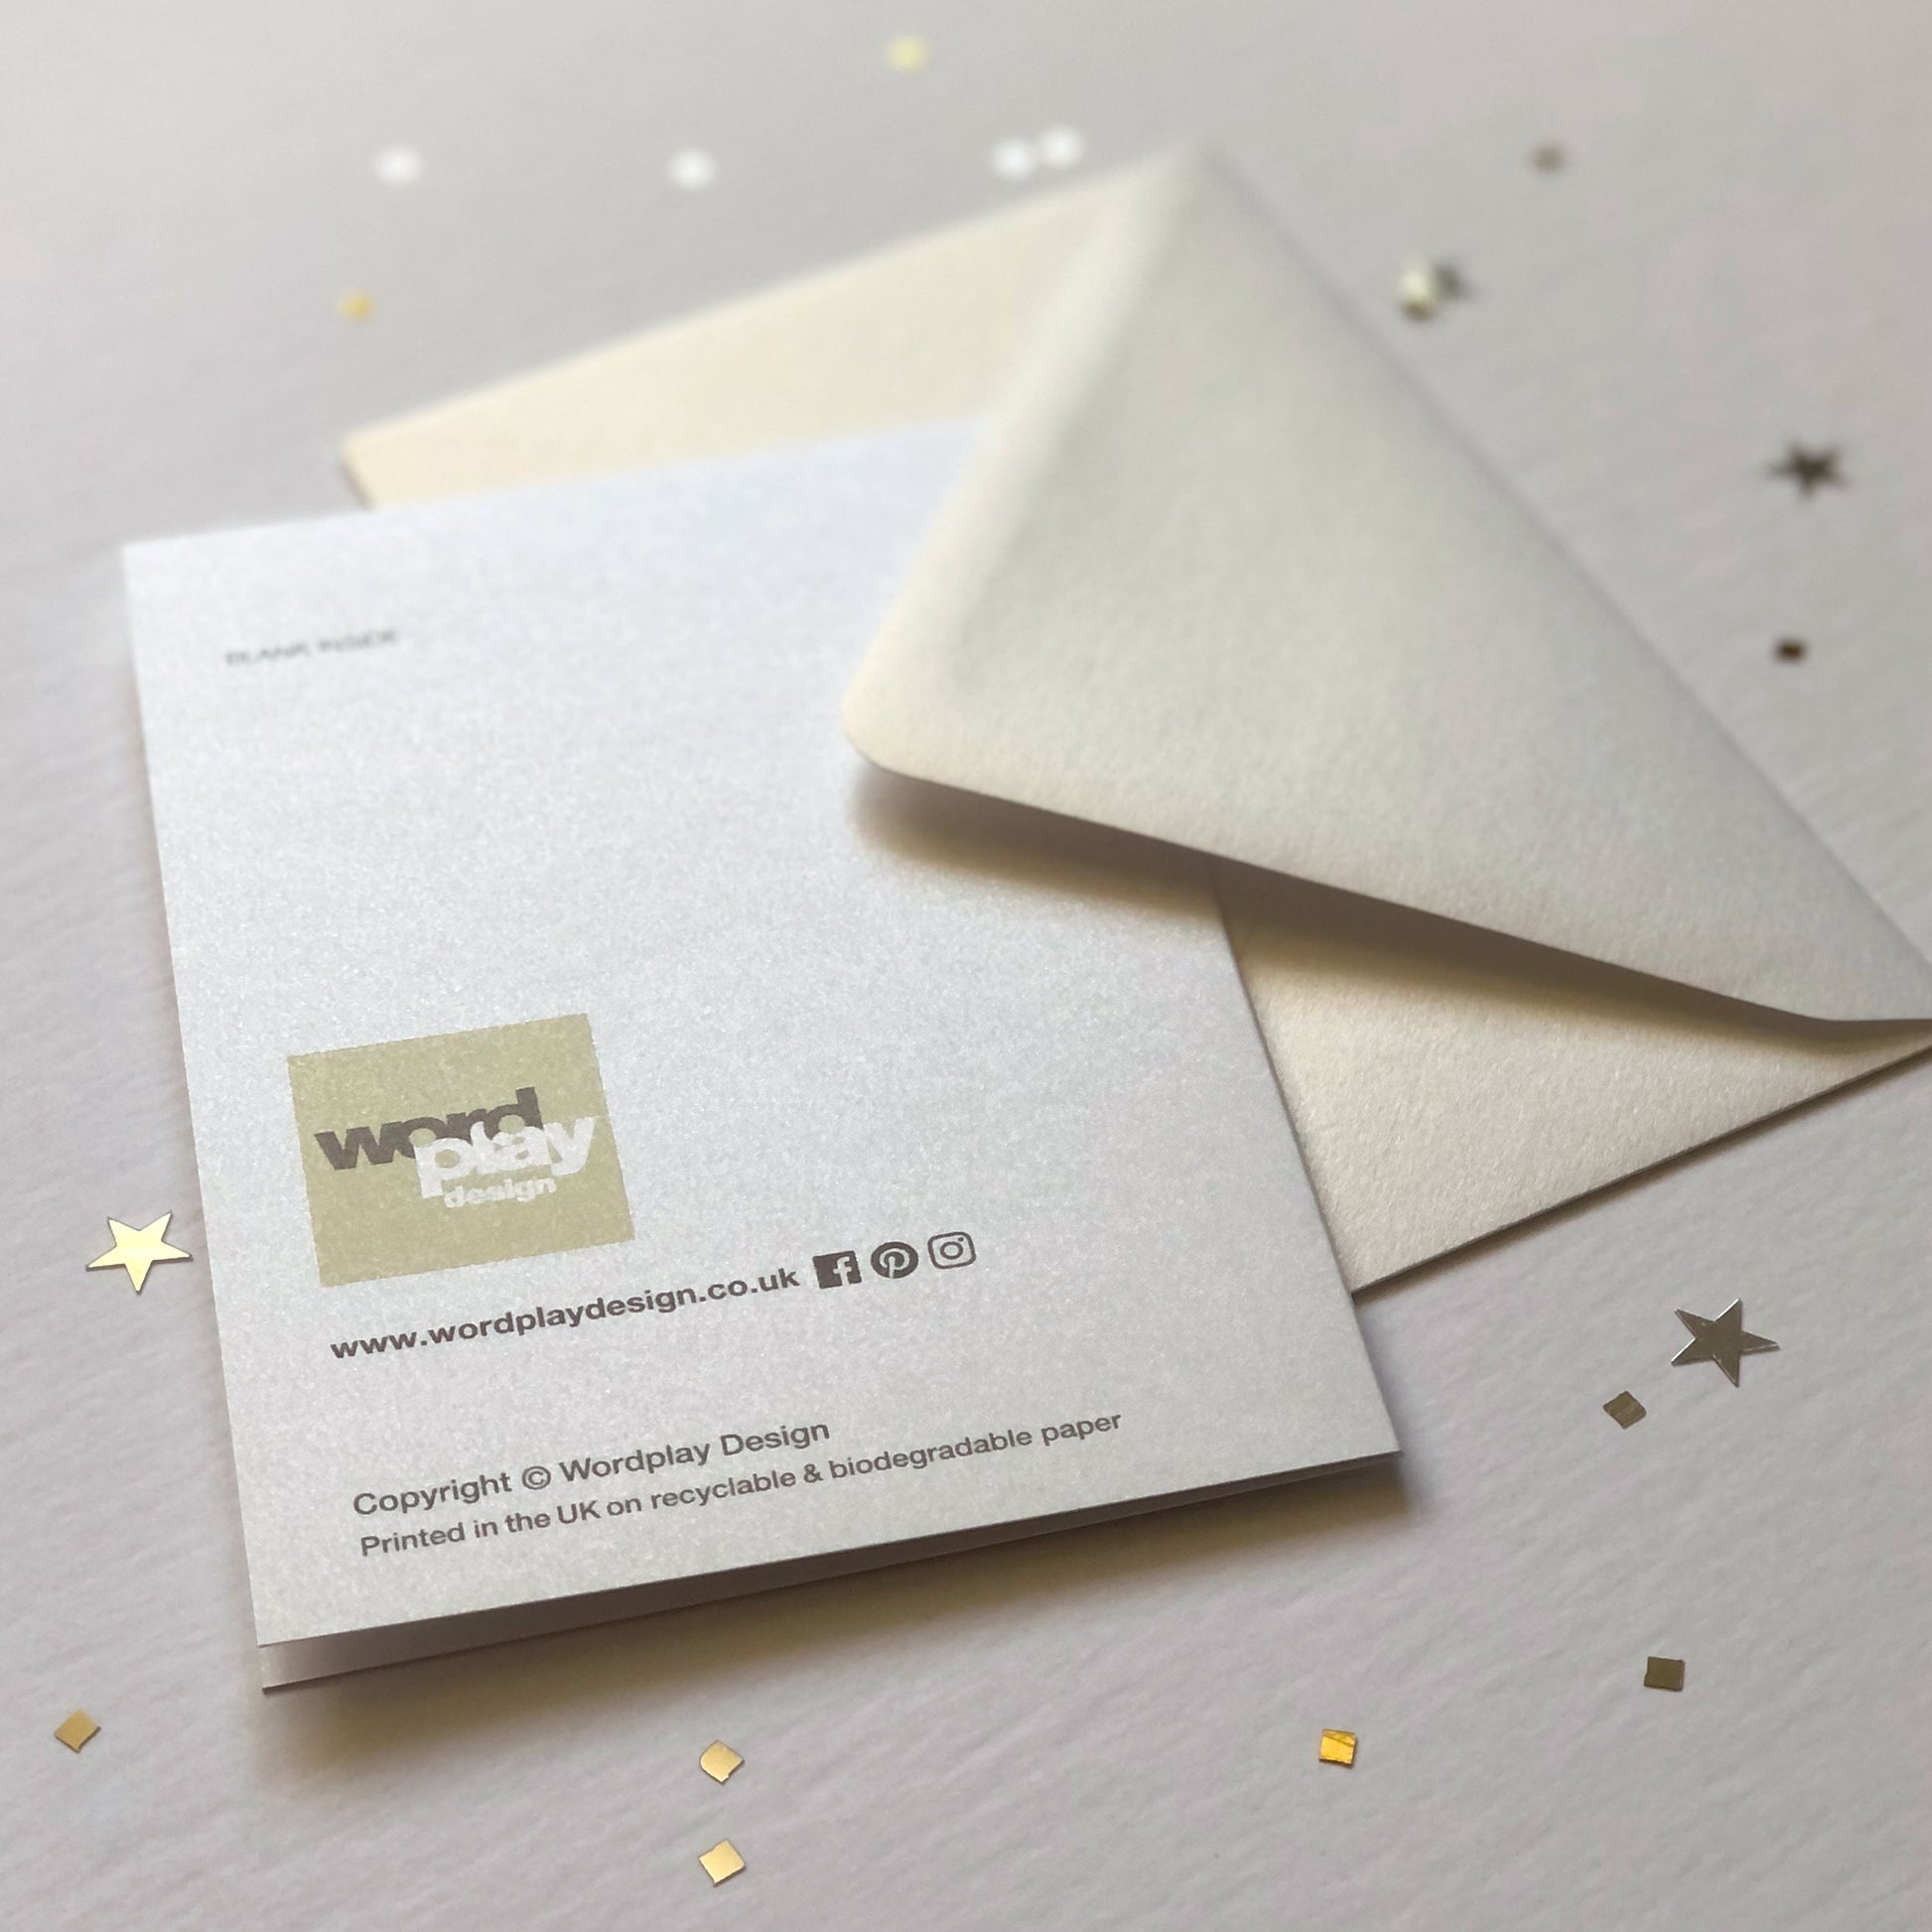 A pearlescent envelope and a greeting card facing down showing the Wordplay Design logo.